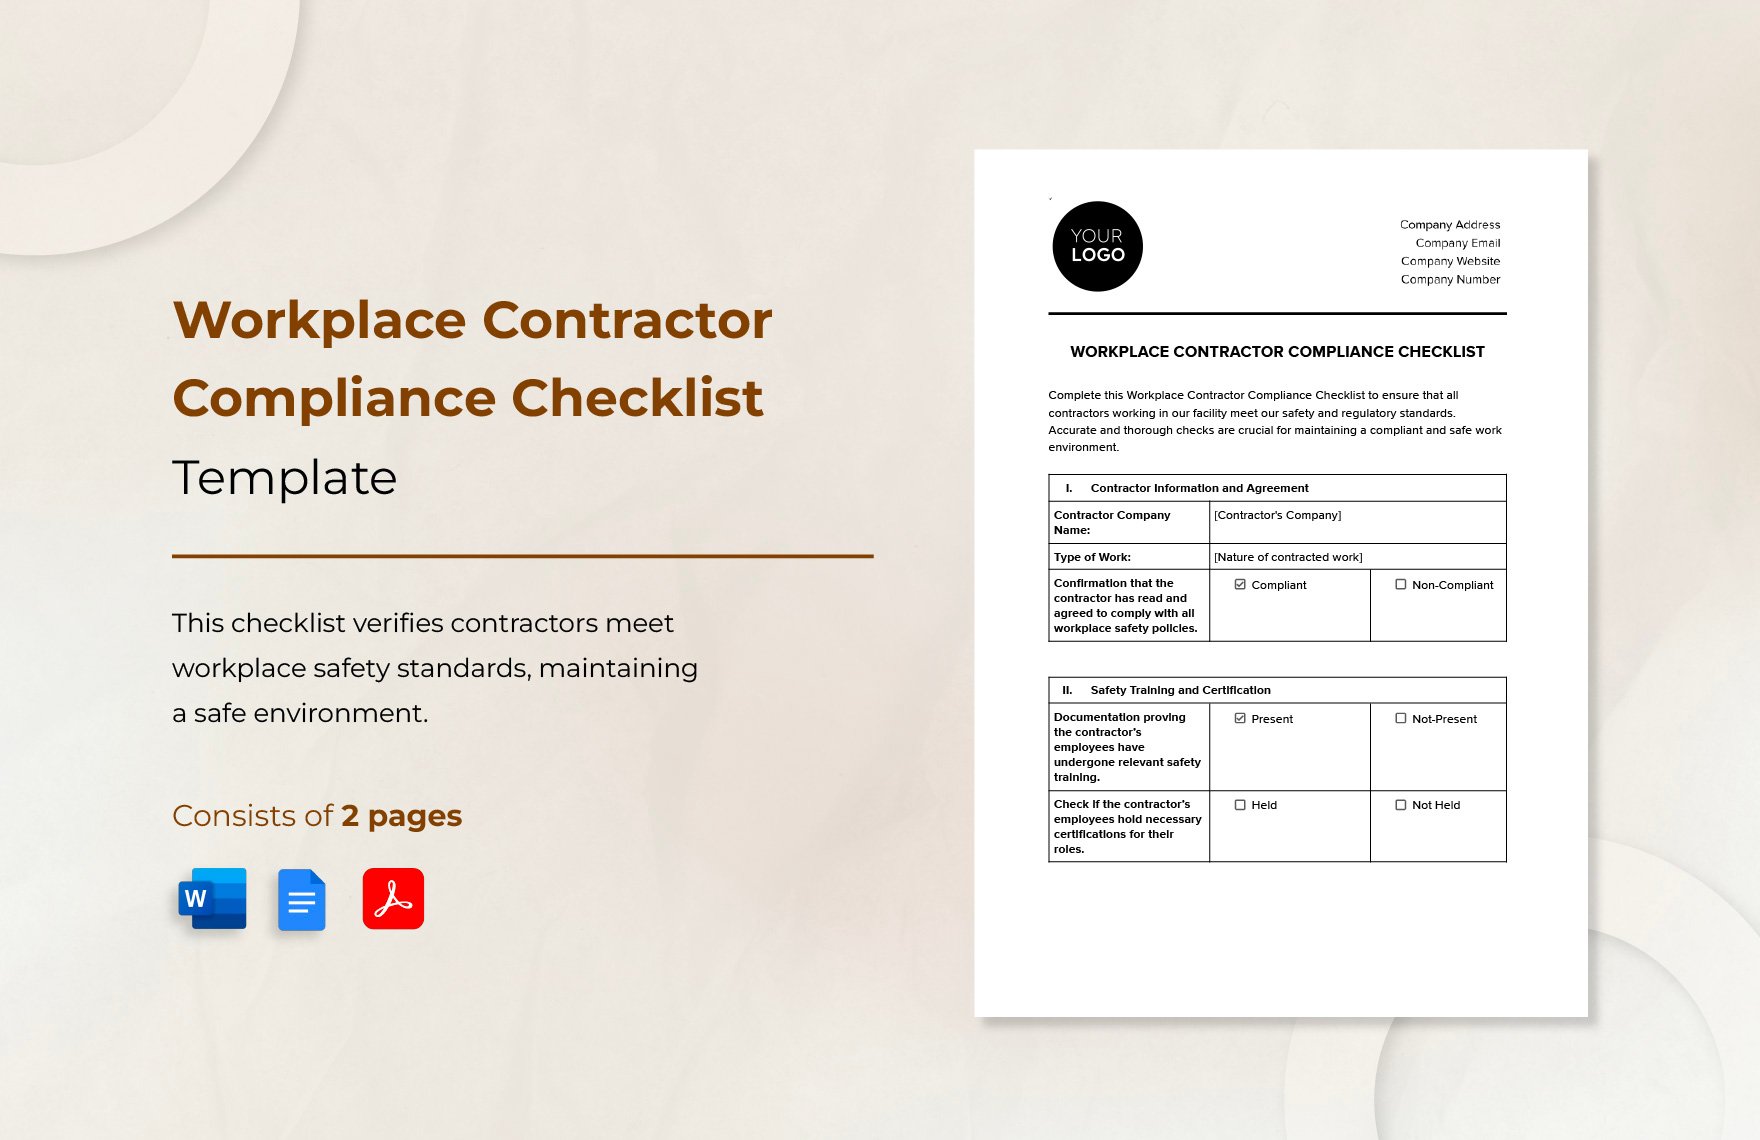 Workplace Contractor Compliance Checklist Template